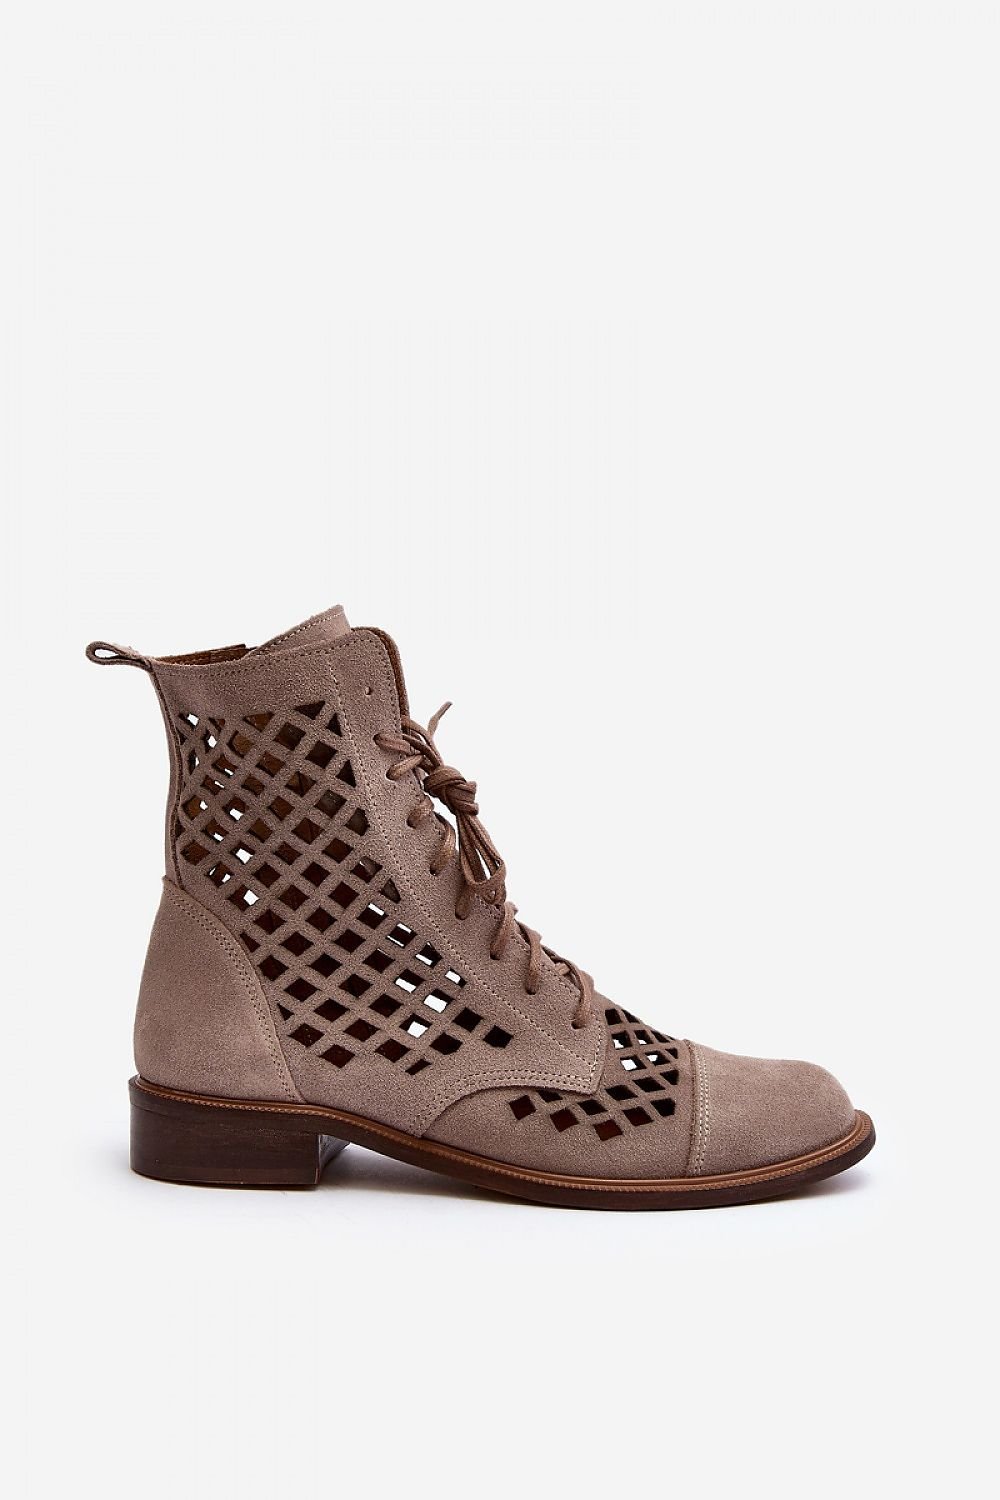 TEEK - Mesh Natural Leather AnkleBoots SHOES TEEK MH   